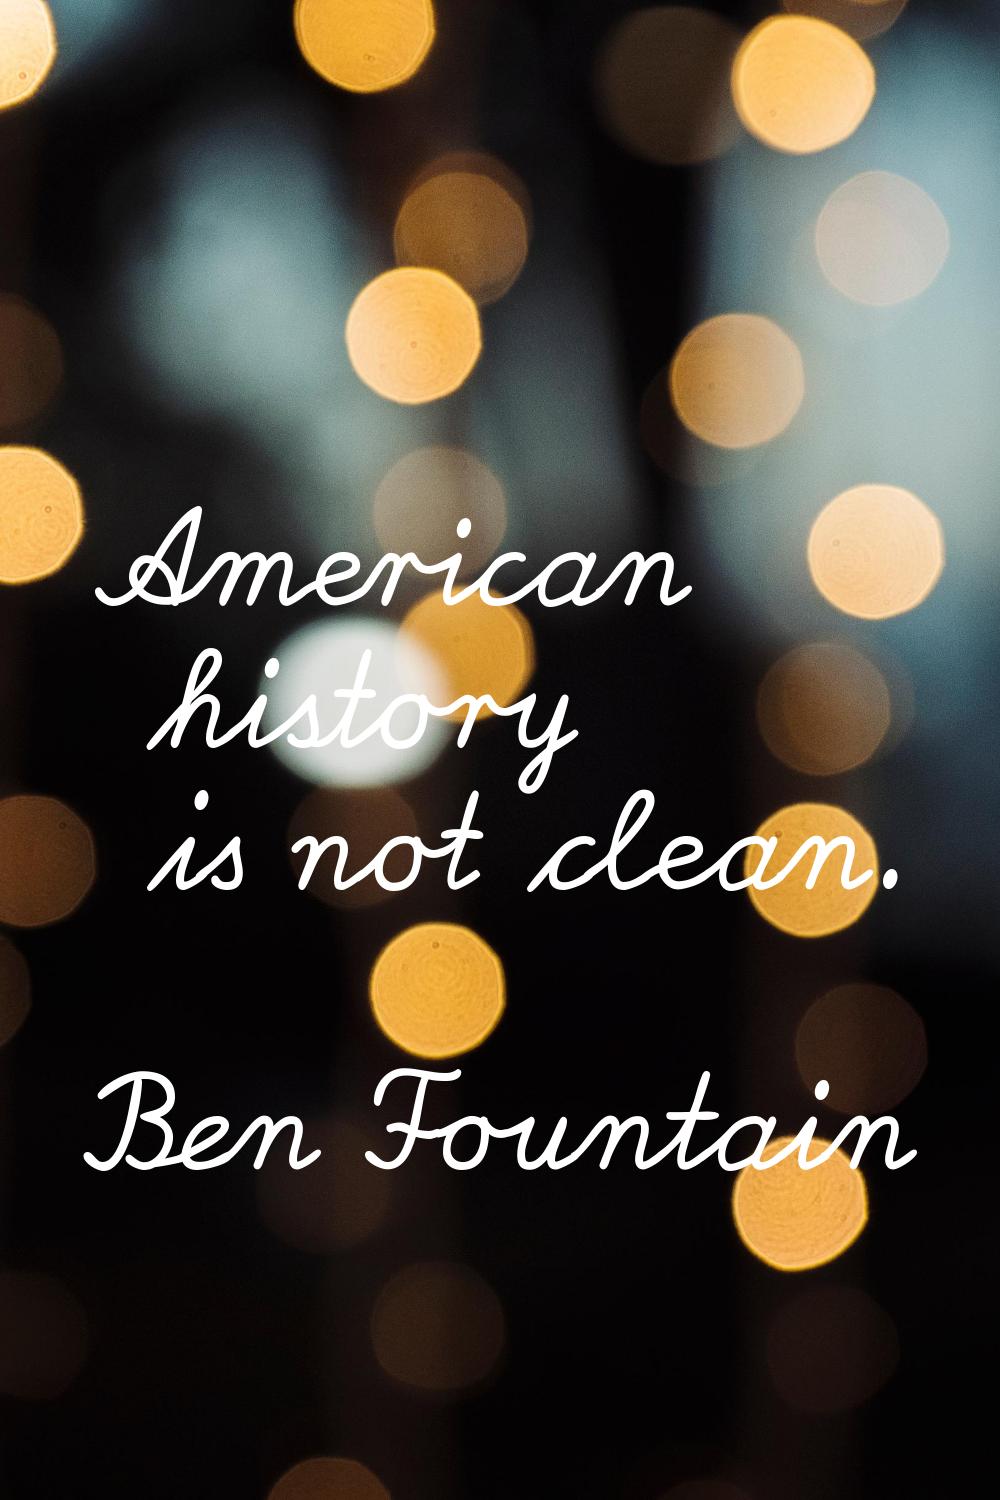 American history is not clean.